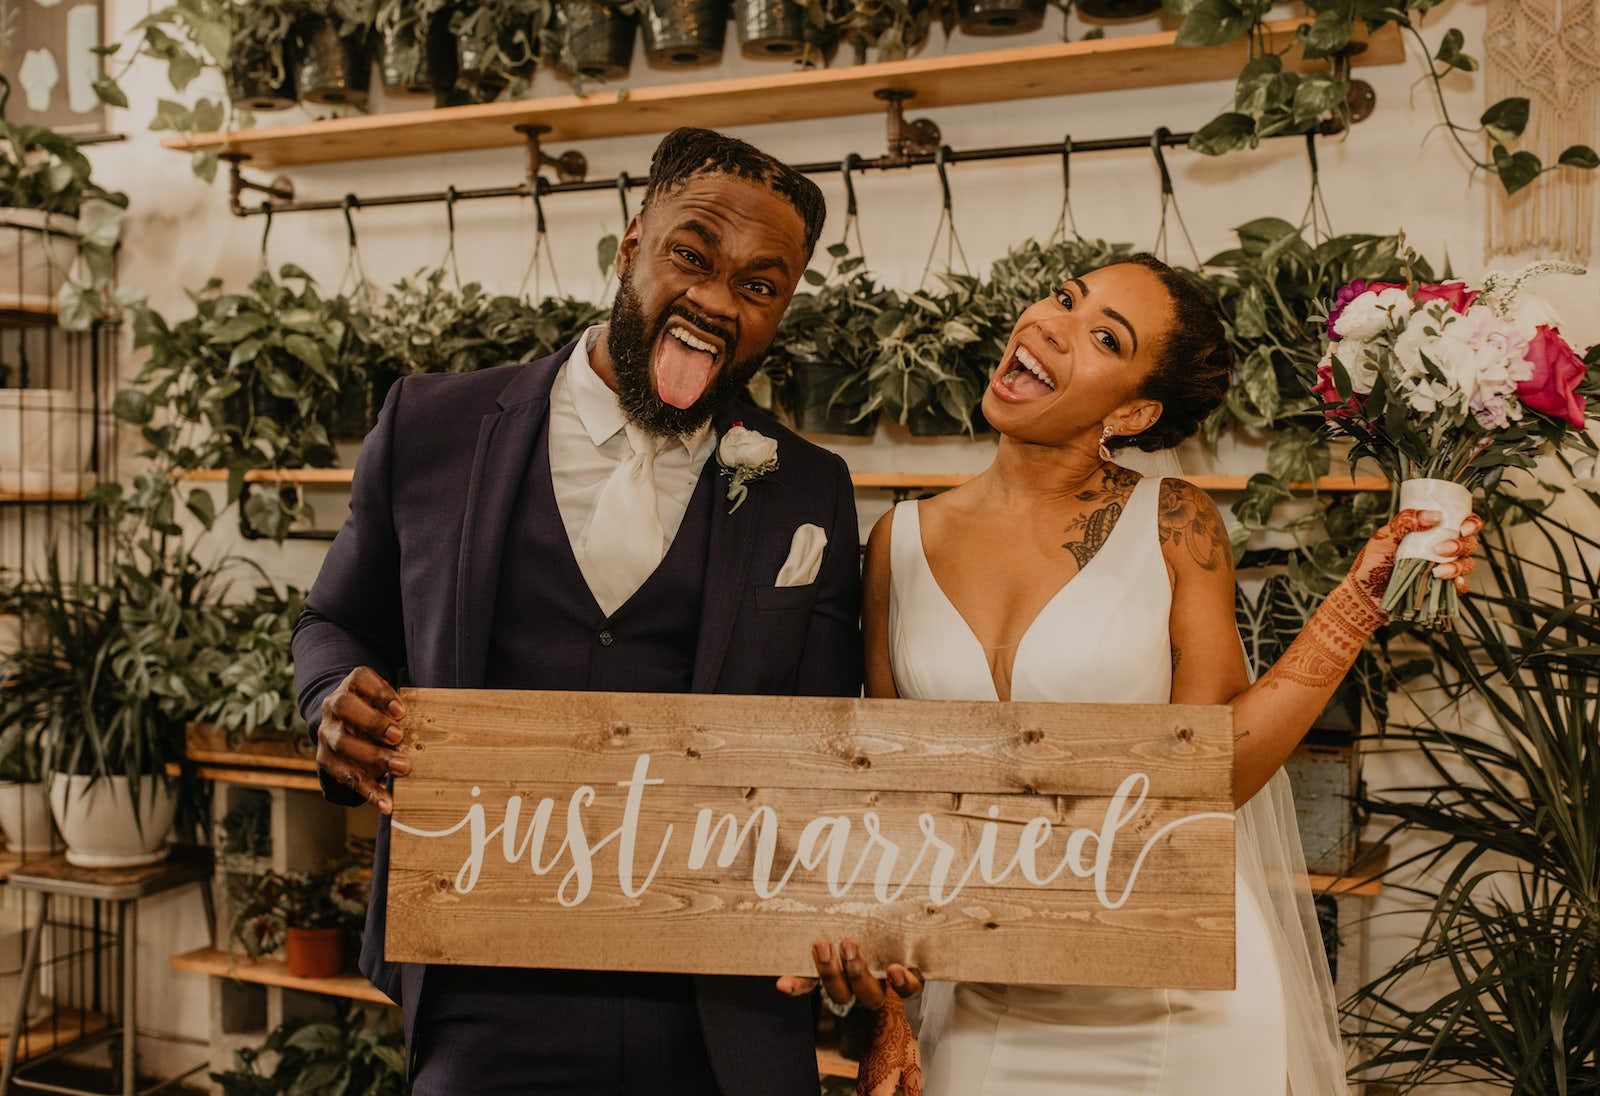 Intimate Elopement Wedding Ceremony, Bride and Groom Holding Wooden Just Married Sign at Unique Plant Shop Wedding Venue Wild Roots | Tampa Bay Wedding Planner Elope Tampa Bay